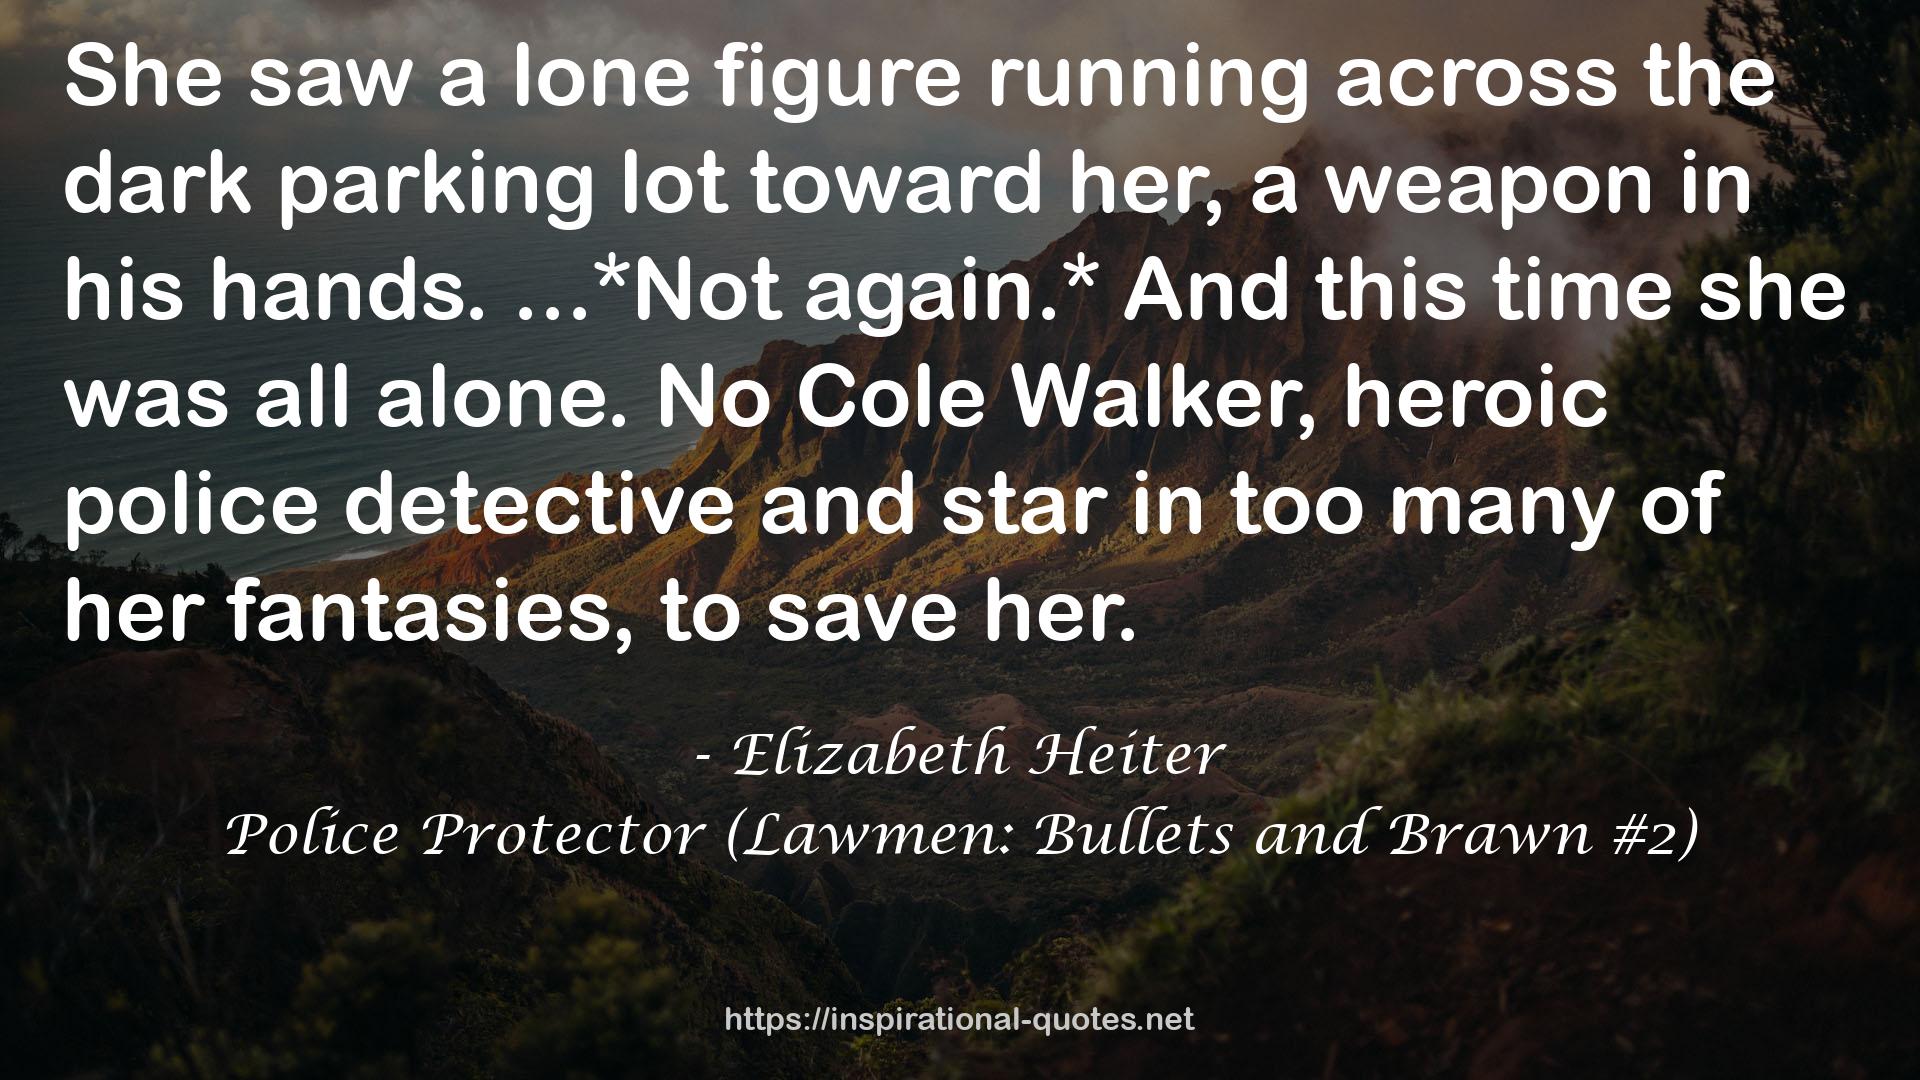 Police Protector (Lawmen: Bullets and Brawn #2) QUOTES